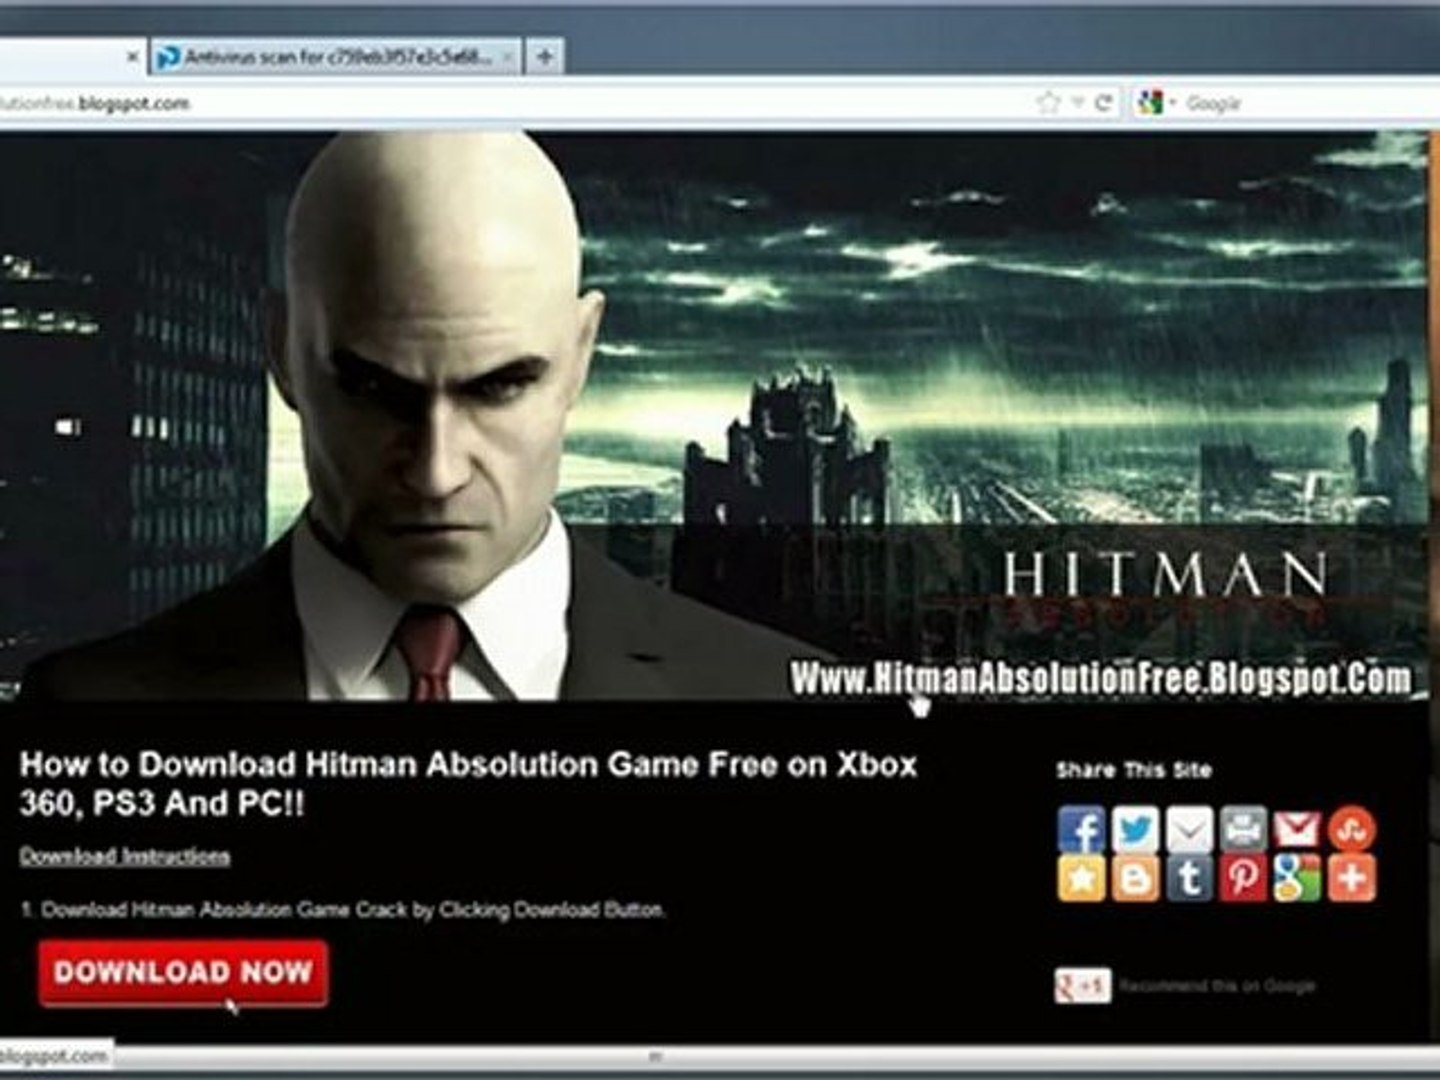 How to Install Hitman Absolution Game Free on Xbox 360 PS3 And PC - video  Dailymotion